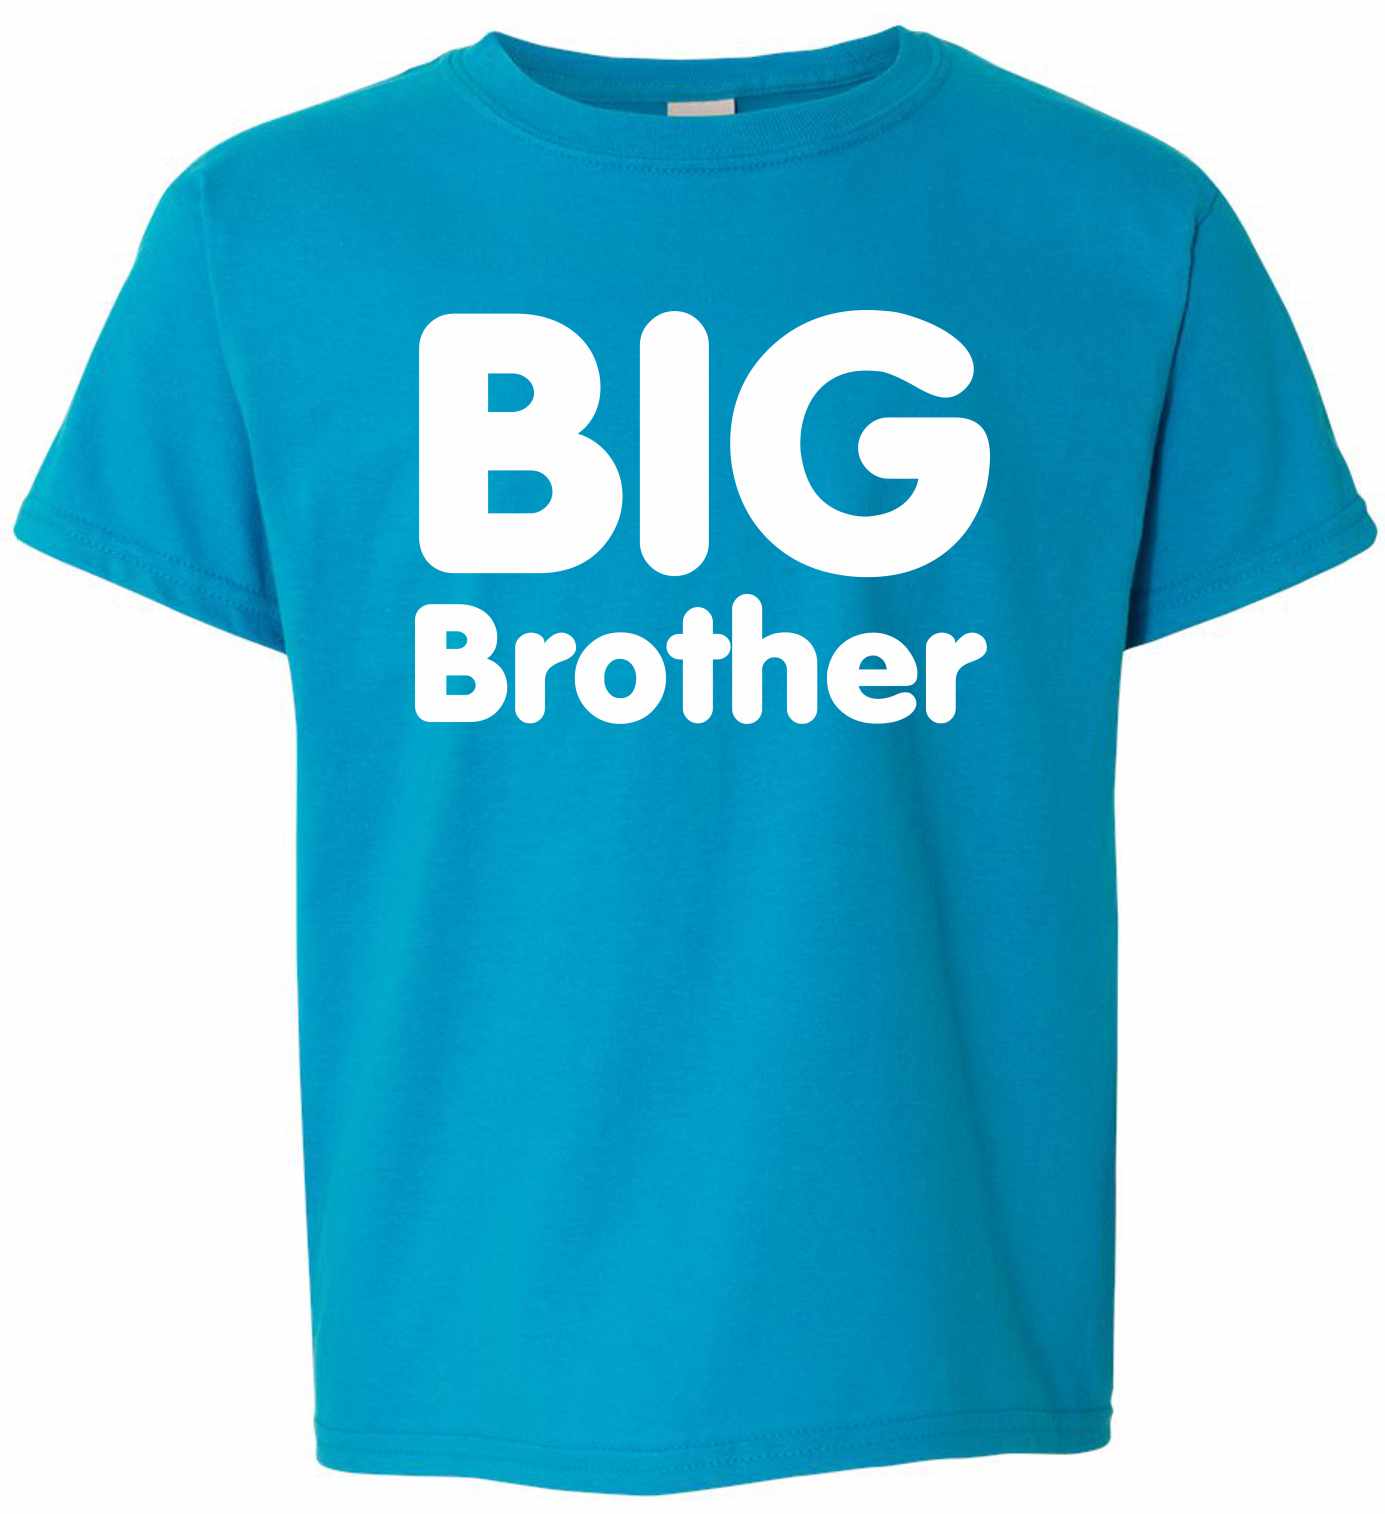 BIG BROTHER Youth T-Shirt